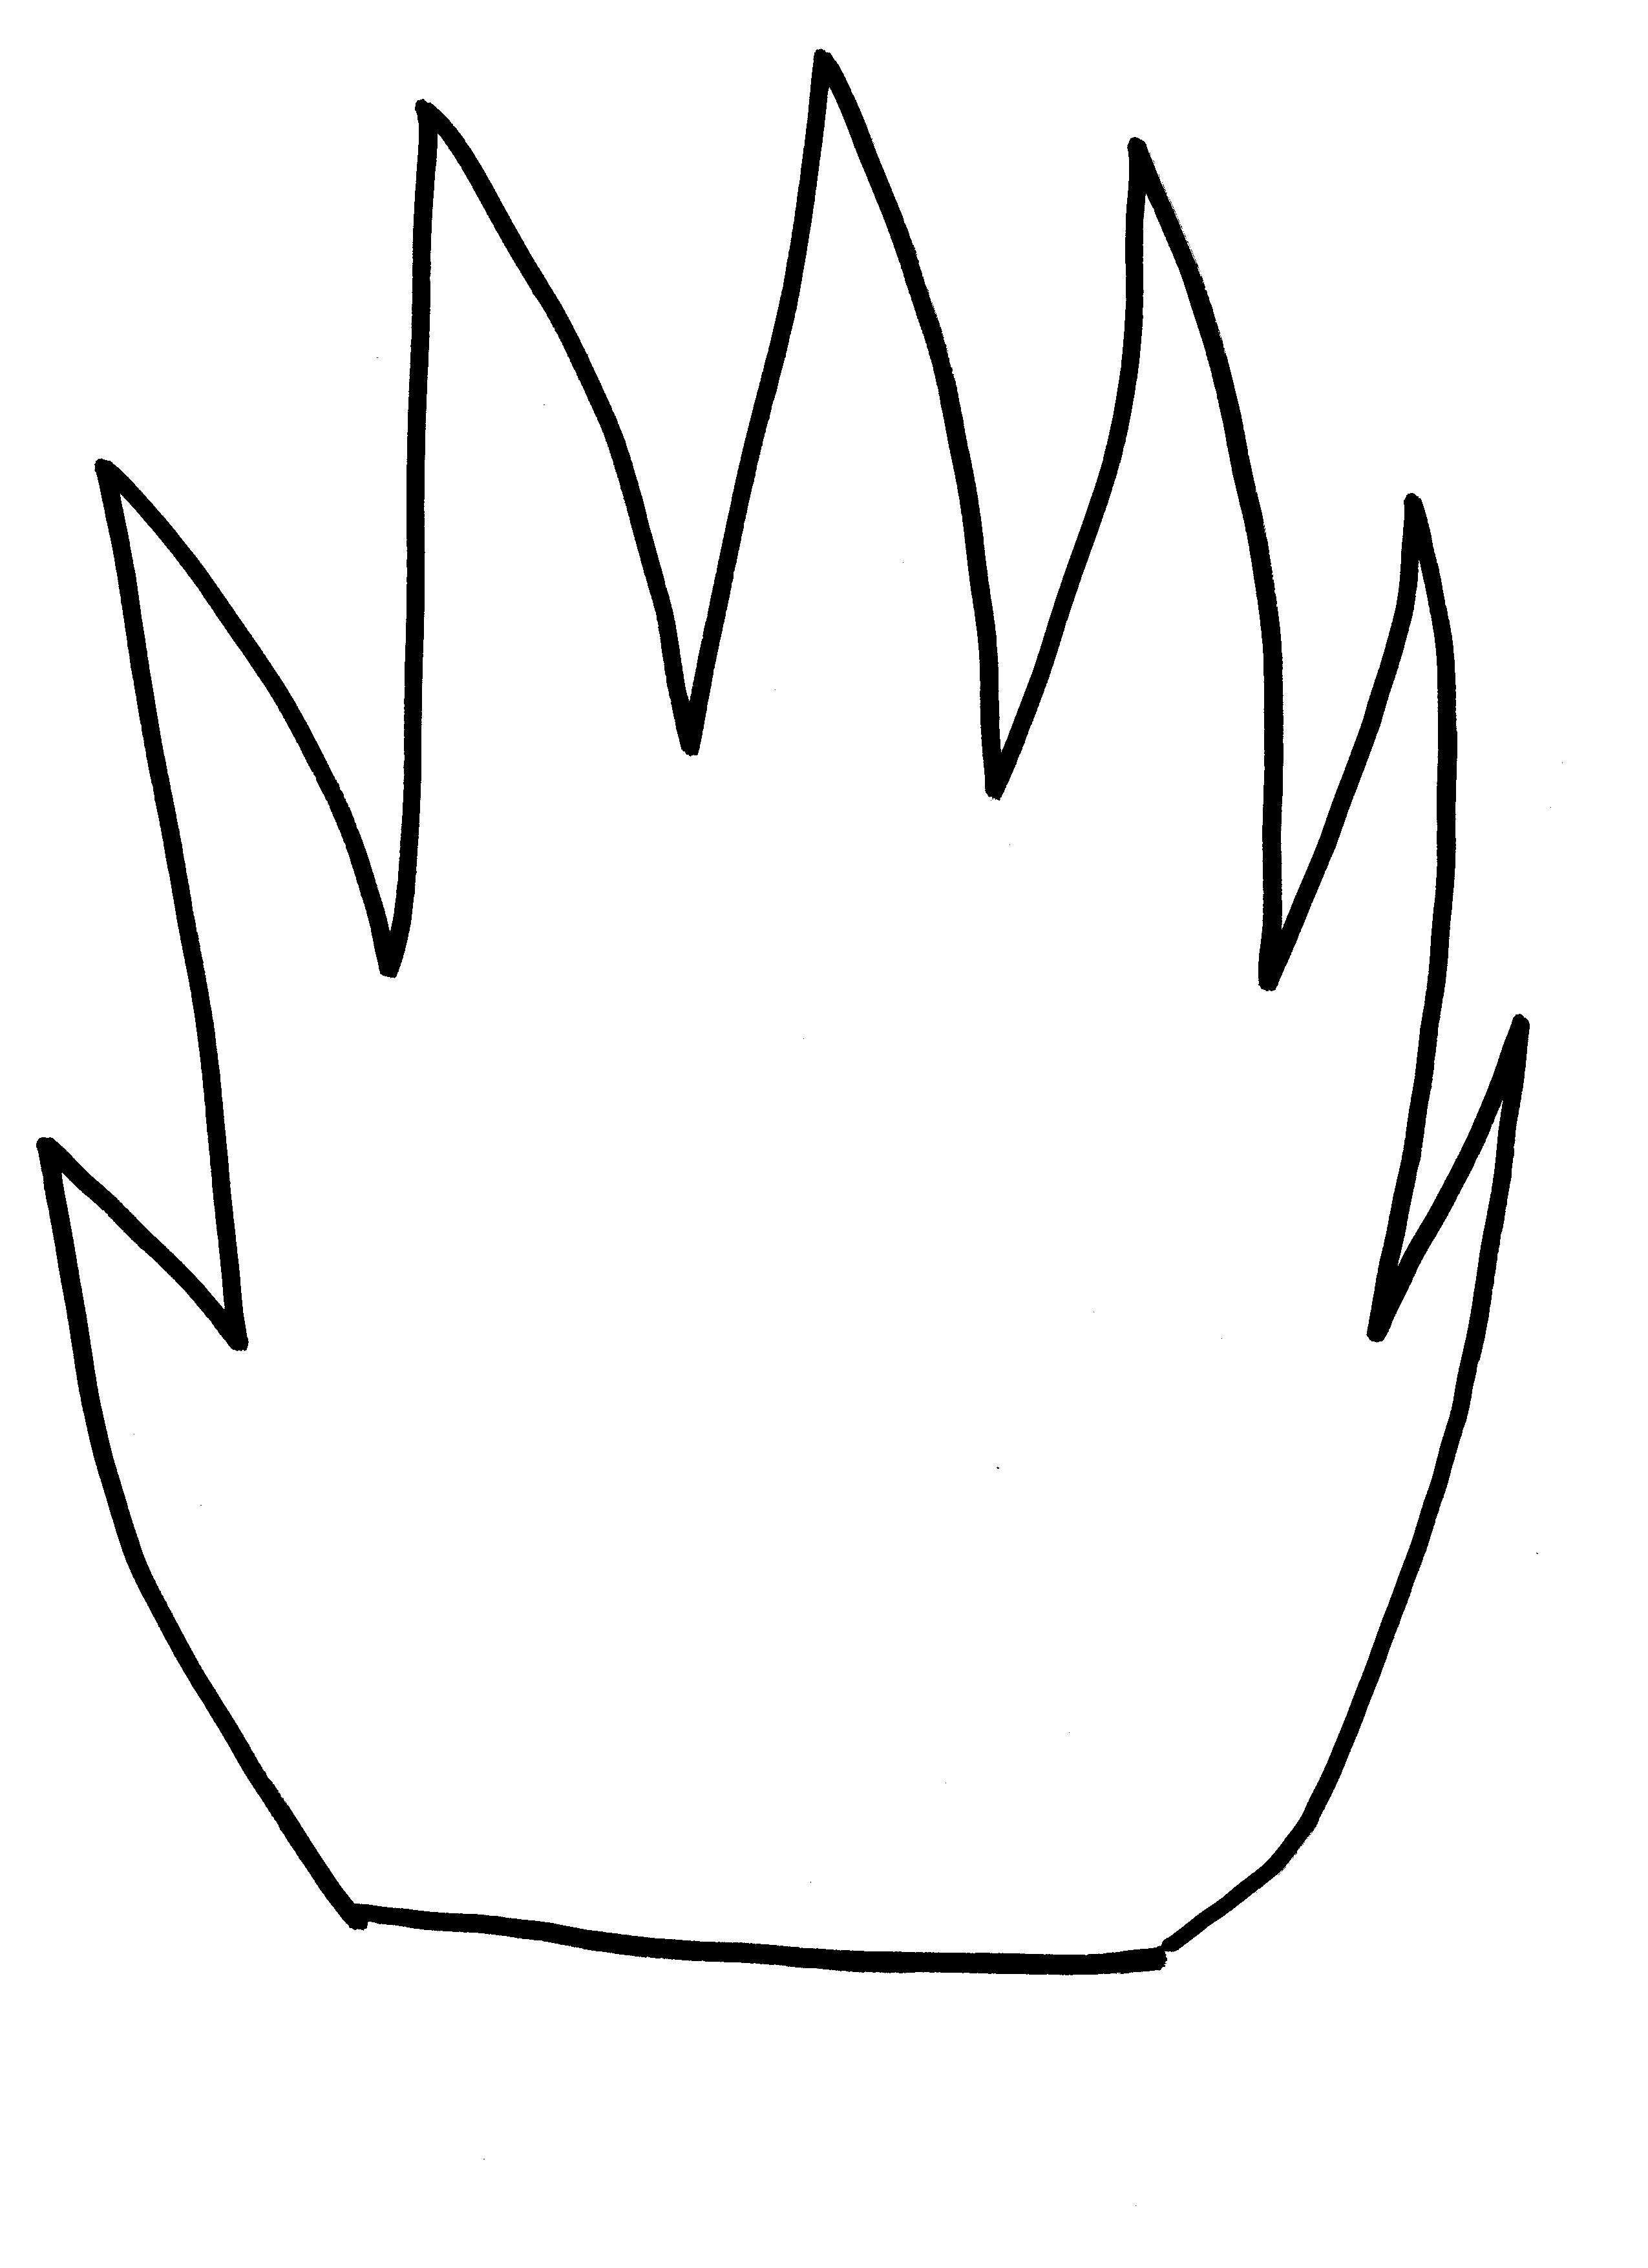 Free Flame Template Printout, Download Free Clip Art, Free Clip Art on